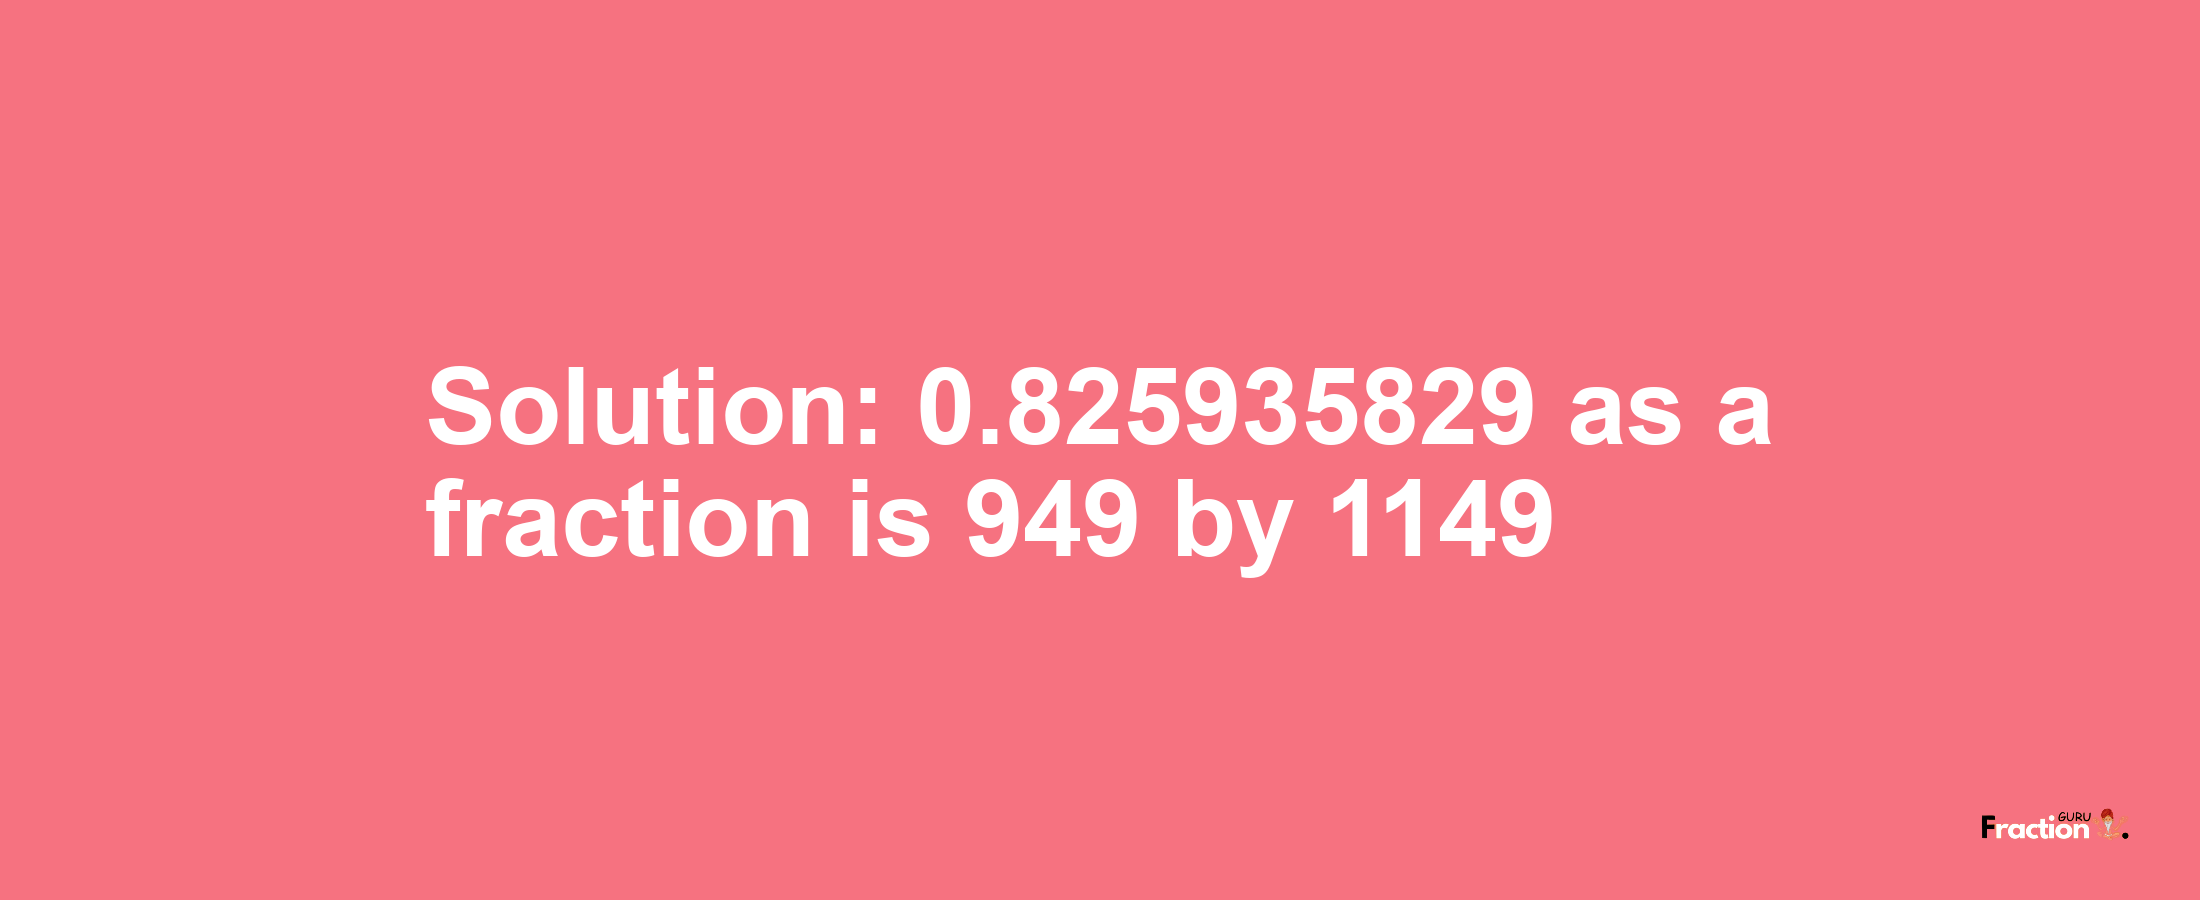 Solution:0.825935829 as a fraction is 949/1149